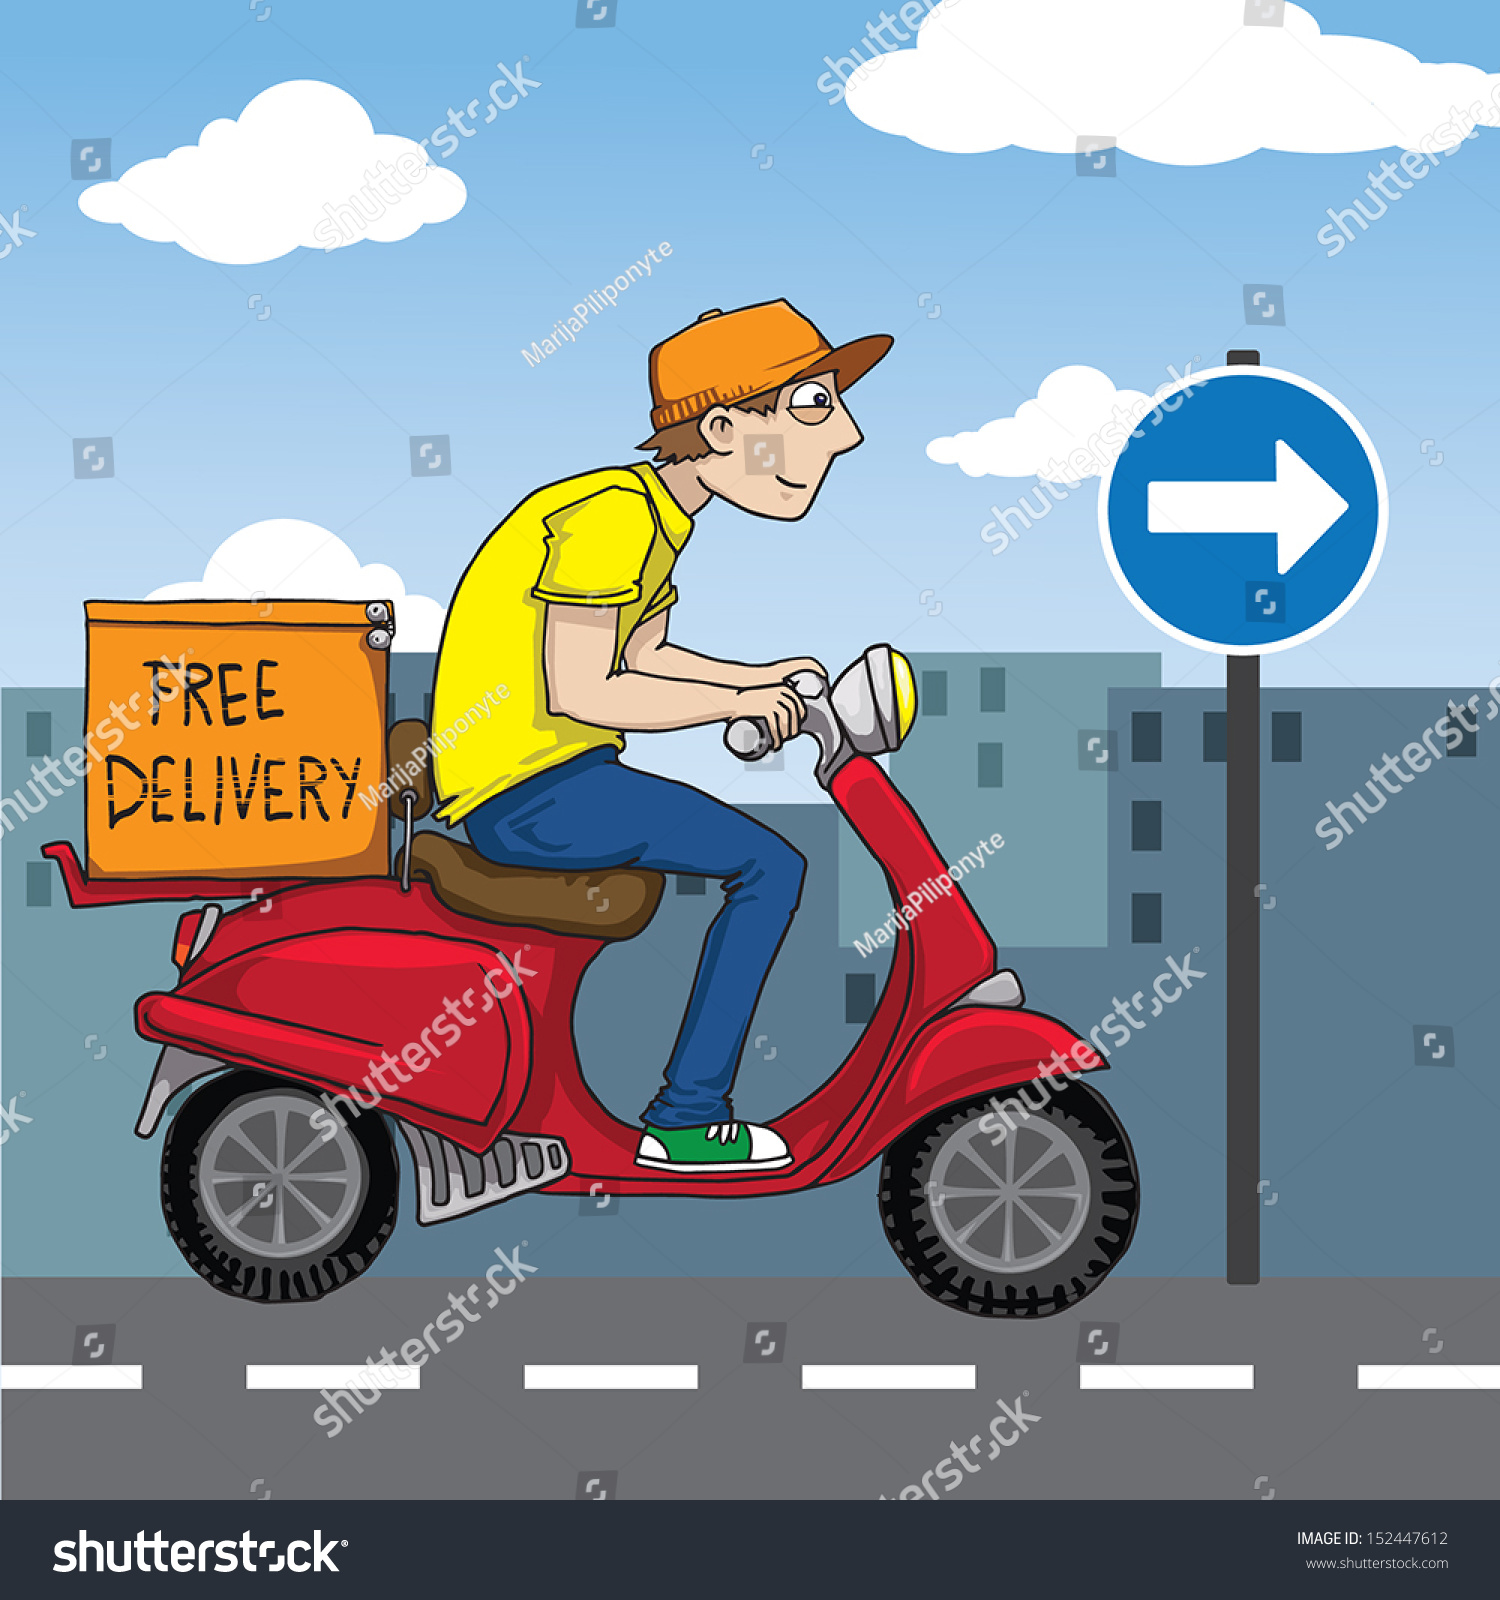 Funny Pizza Delivery Boy Riding Red Motor Bike In City Background Vector Illustration 3104